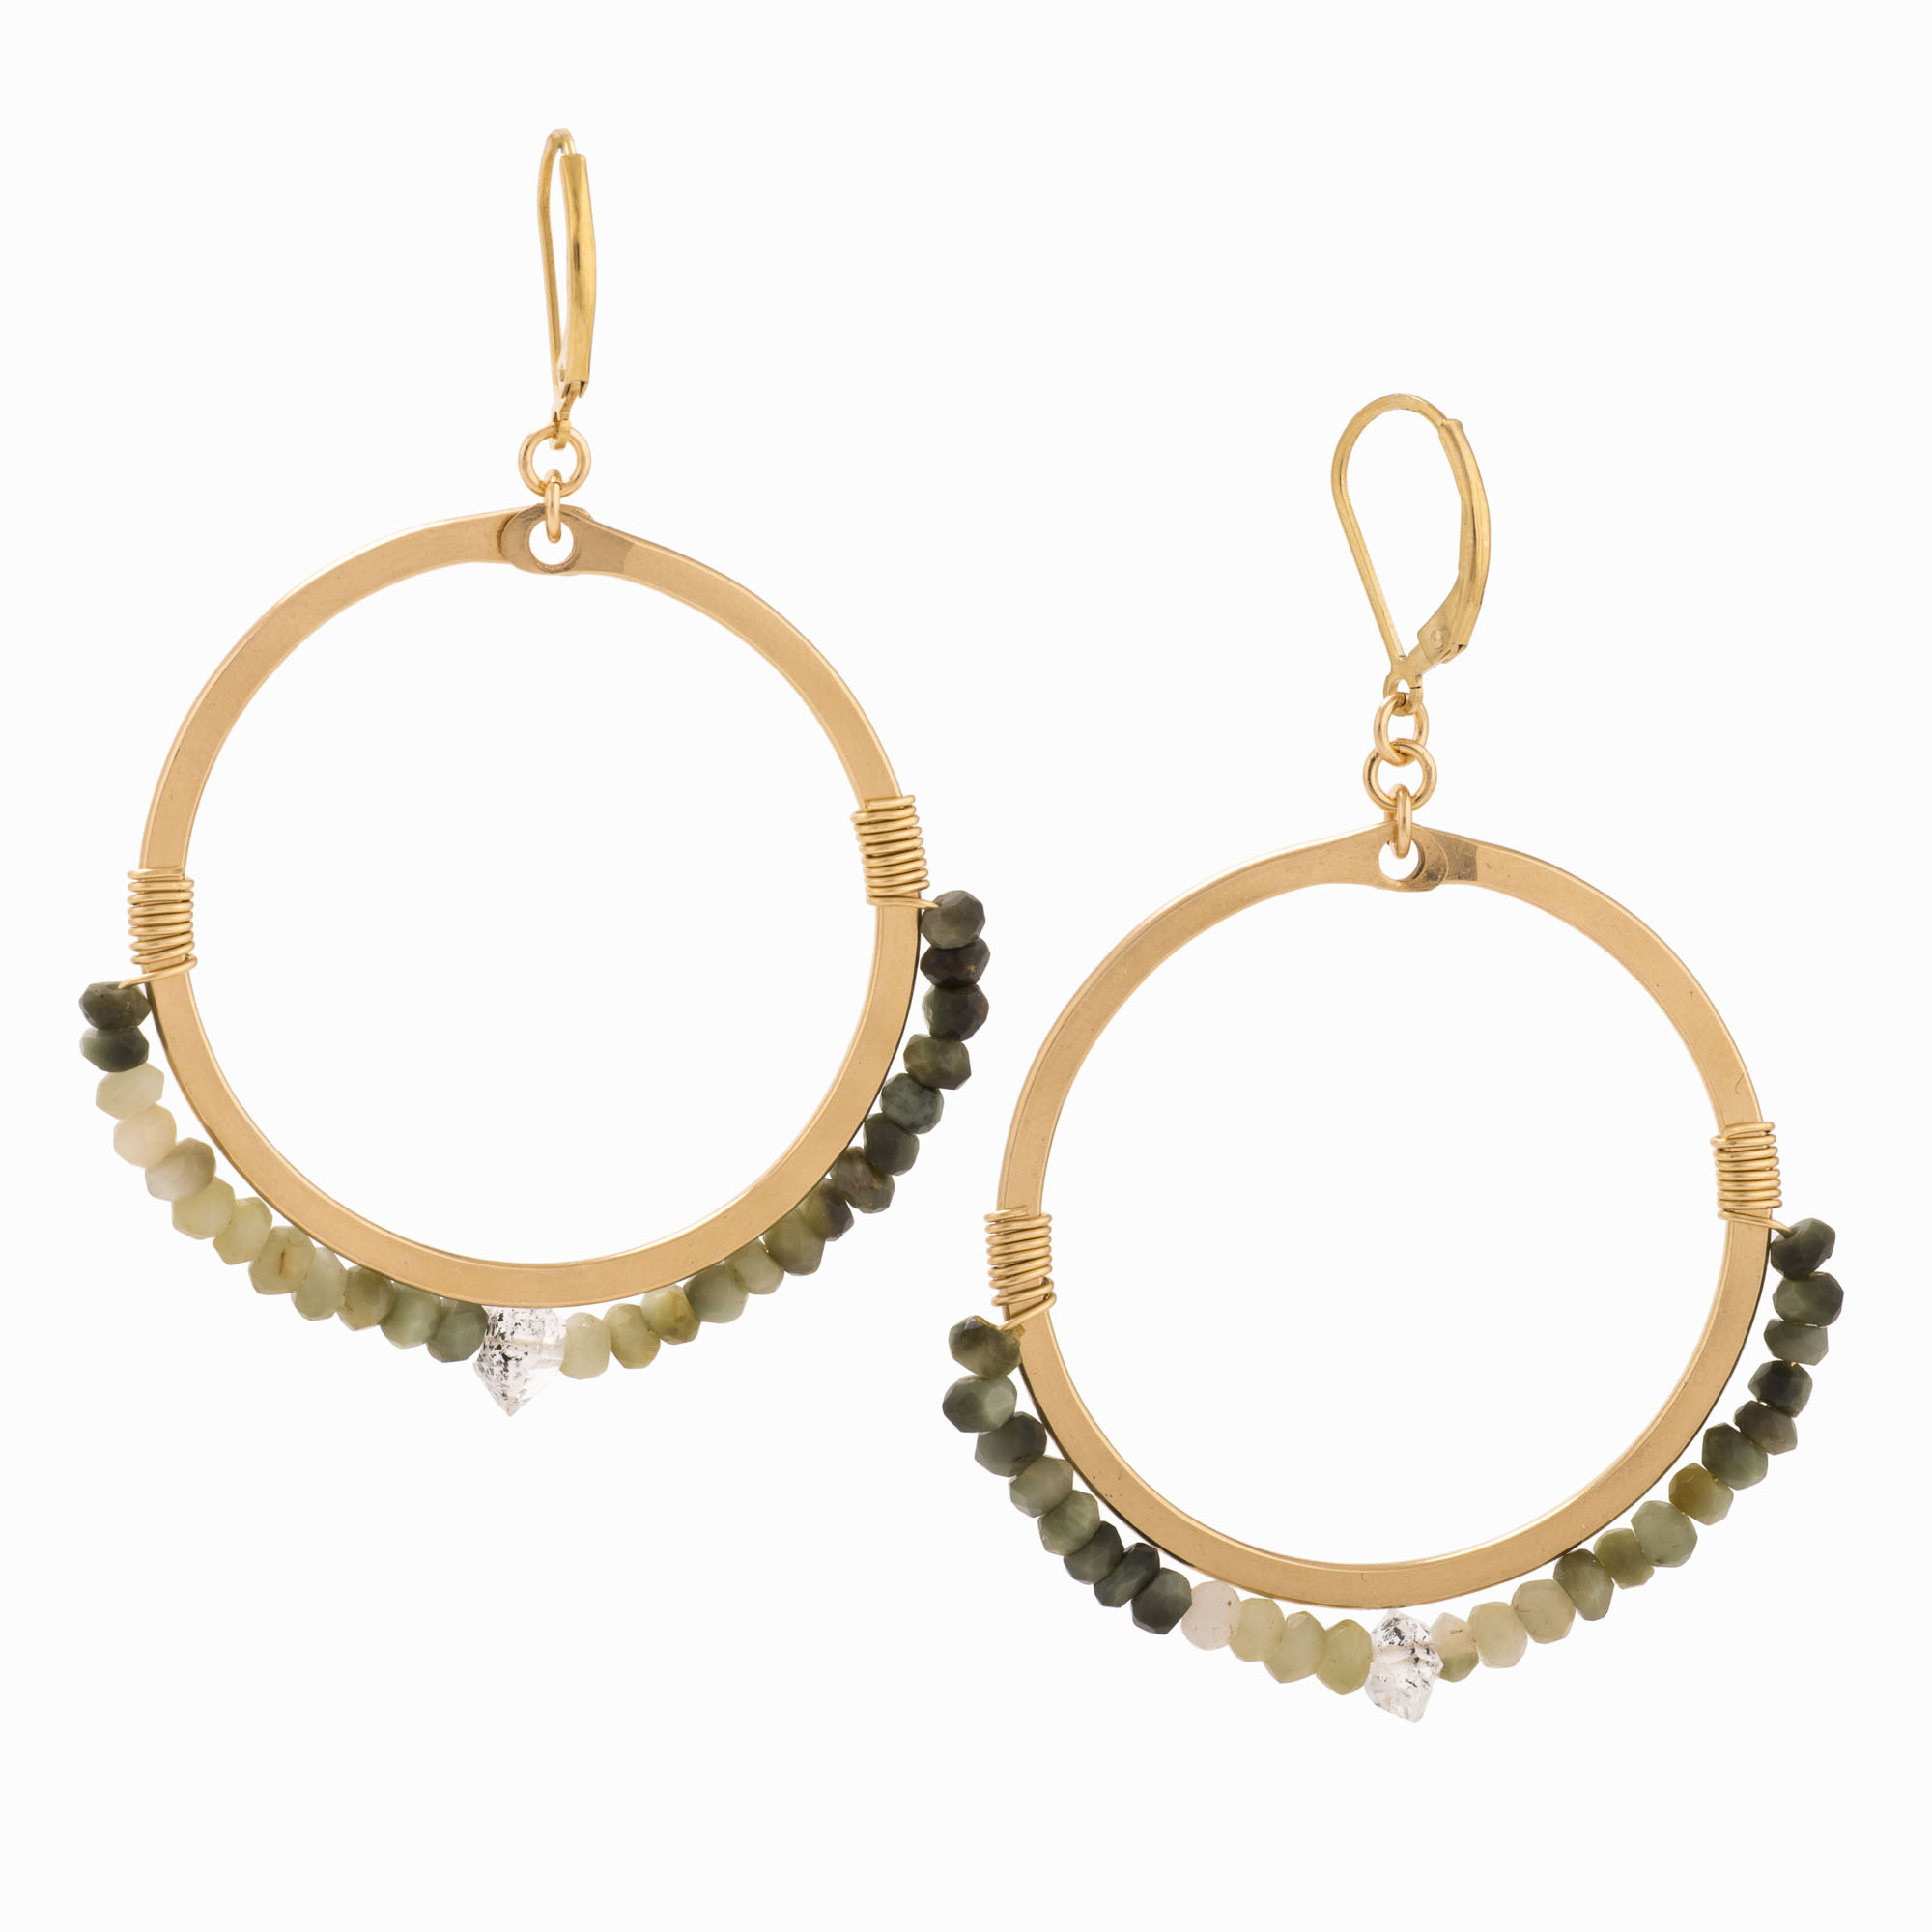 14K gold hoop earrings with moss agate beads.